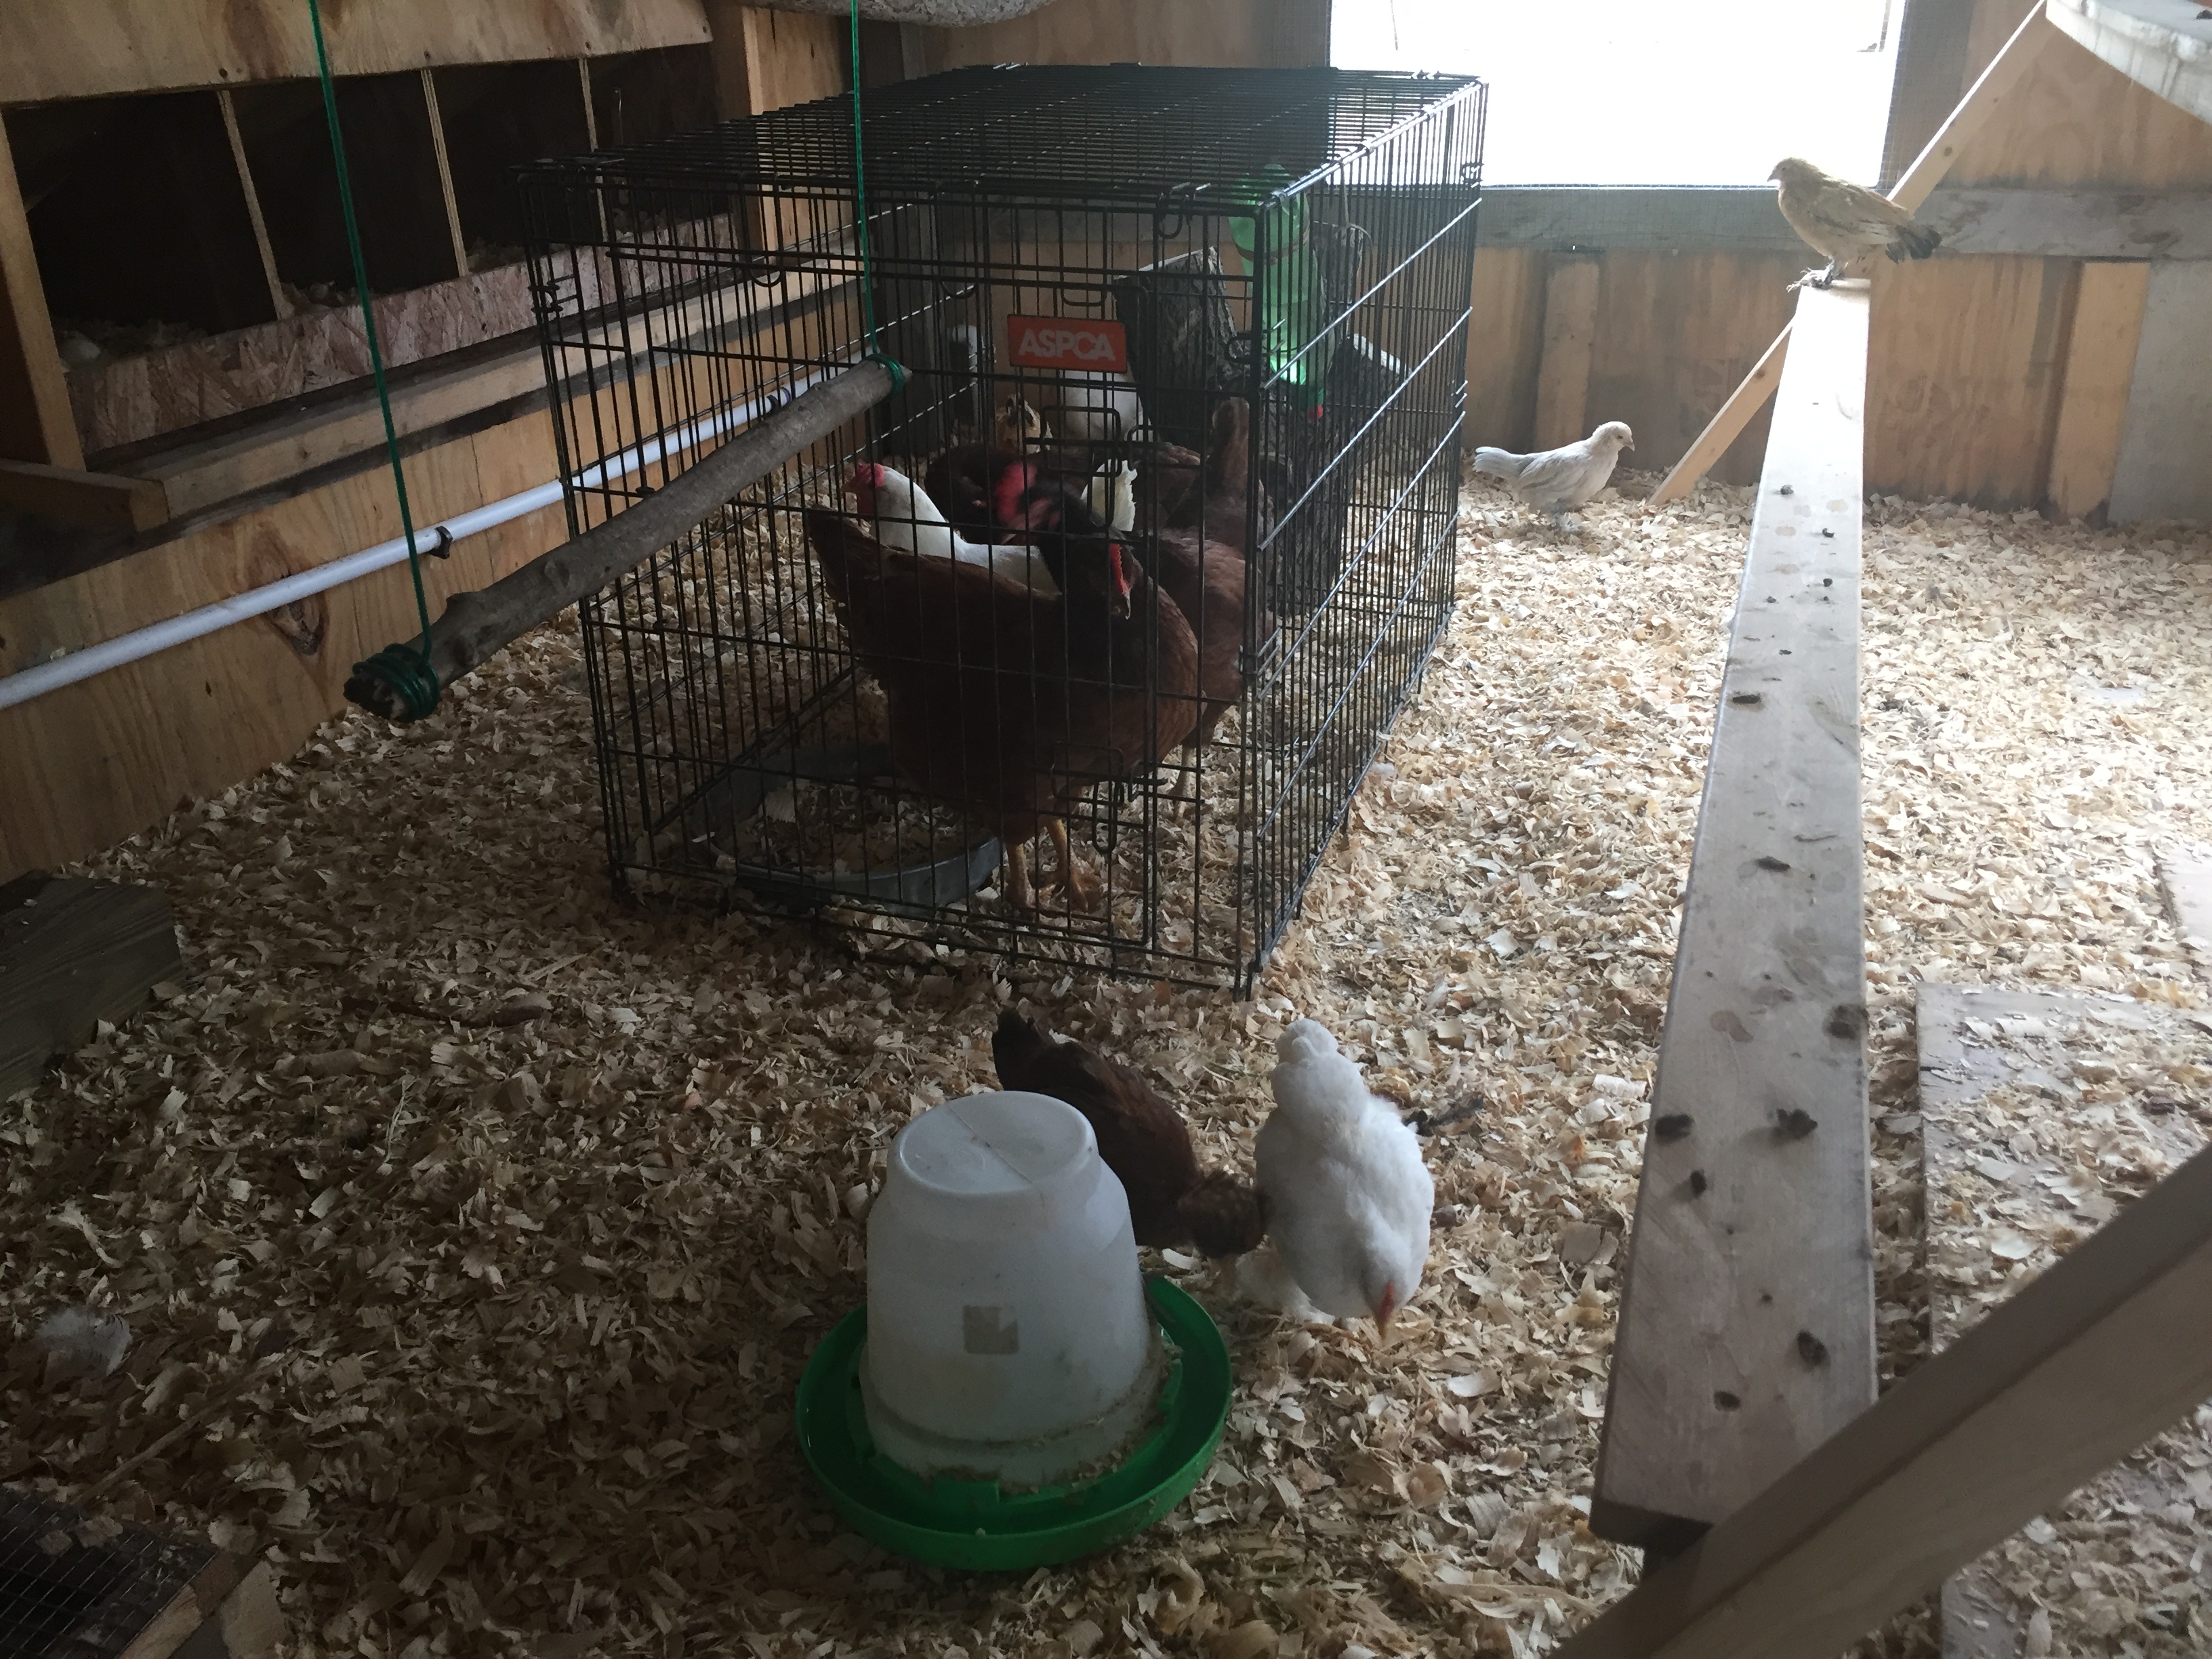 A guy I met from Craigslist give me 3 Rhode Island Red and 1 Long Horn hens that were no longer laying as often. I'm a new chicken keeper so I didn't mind. In this pic they area currently being introduced to my bantam chicks.